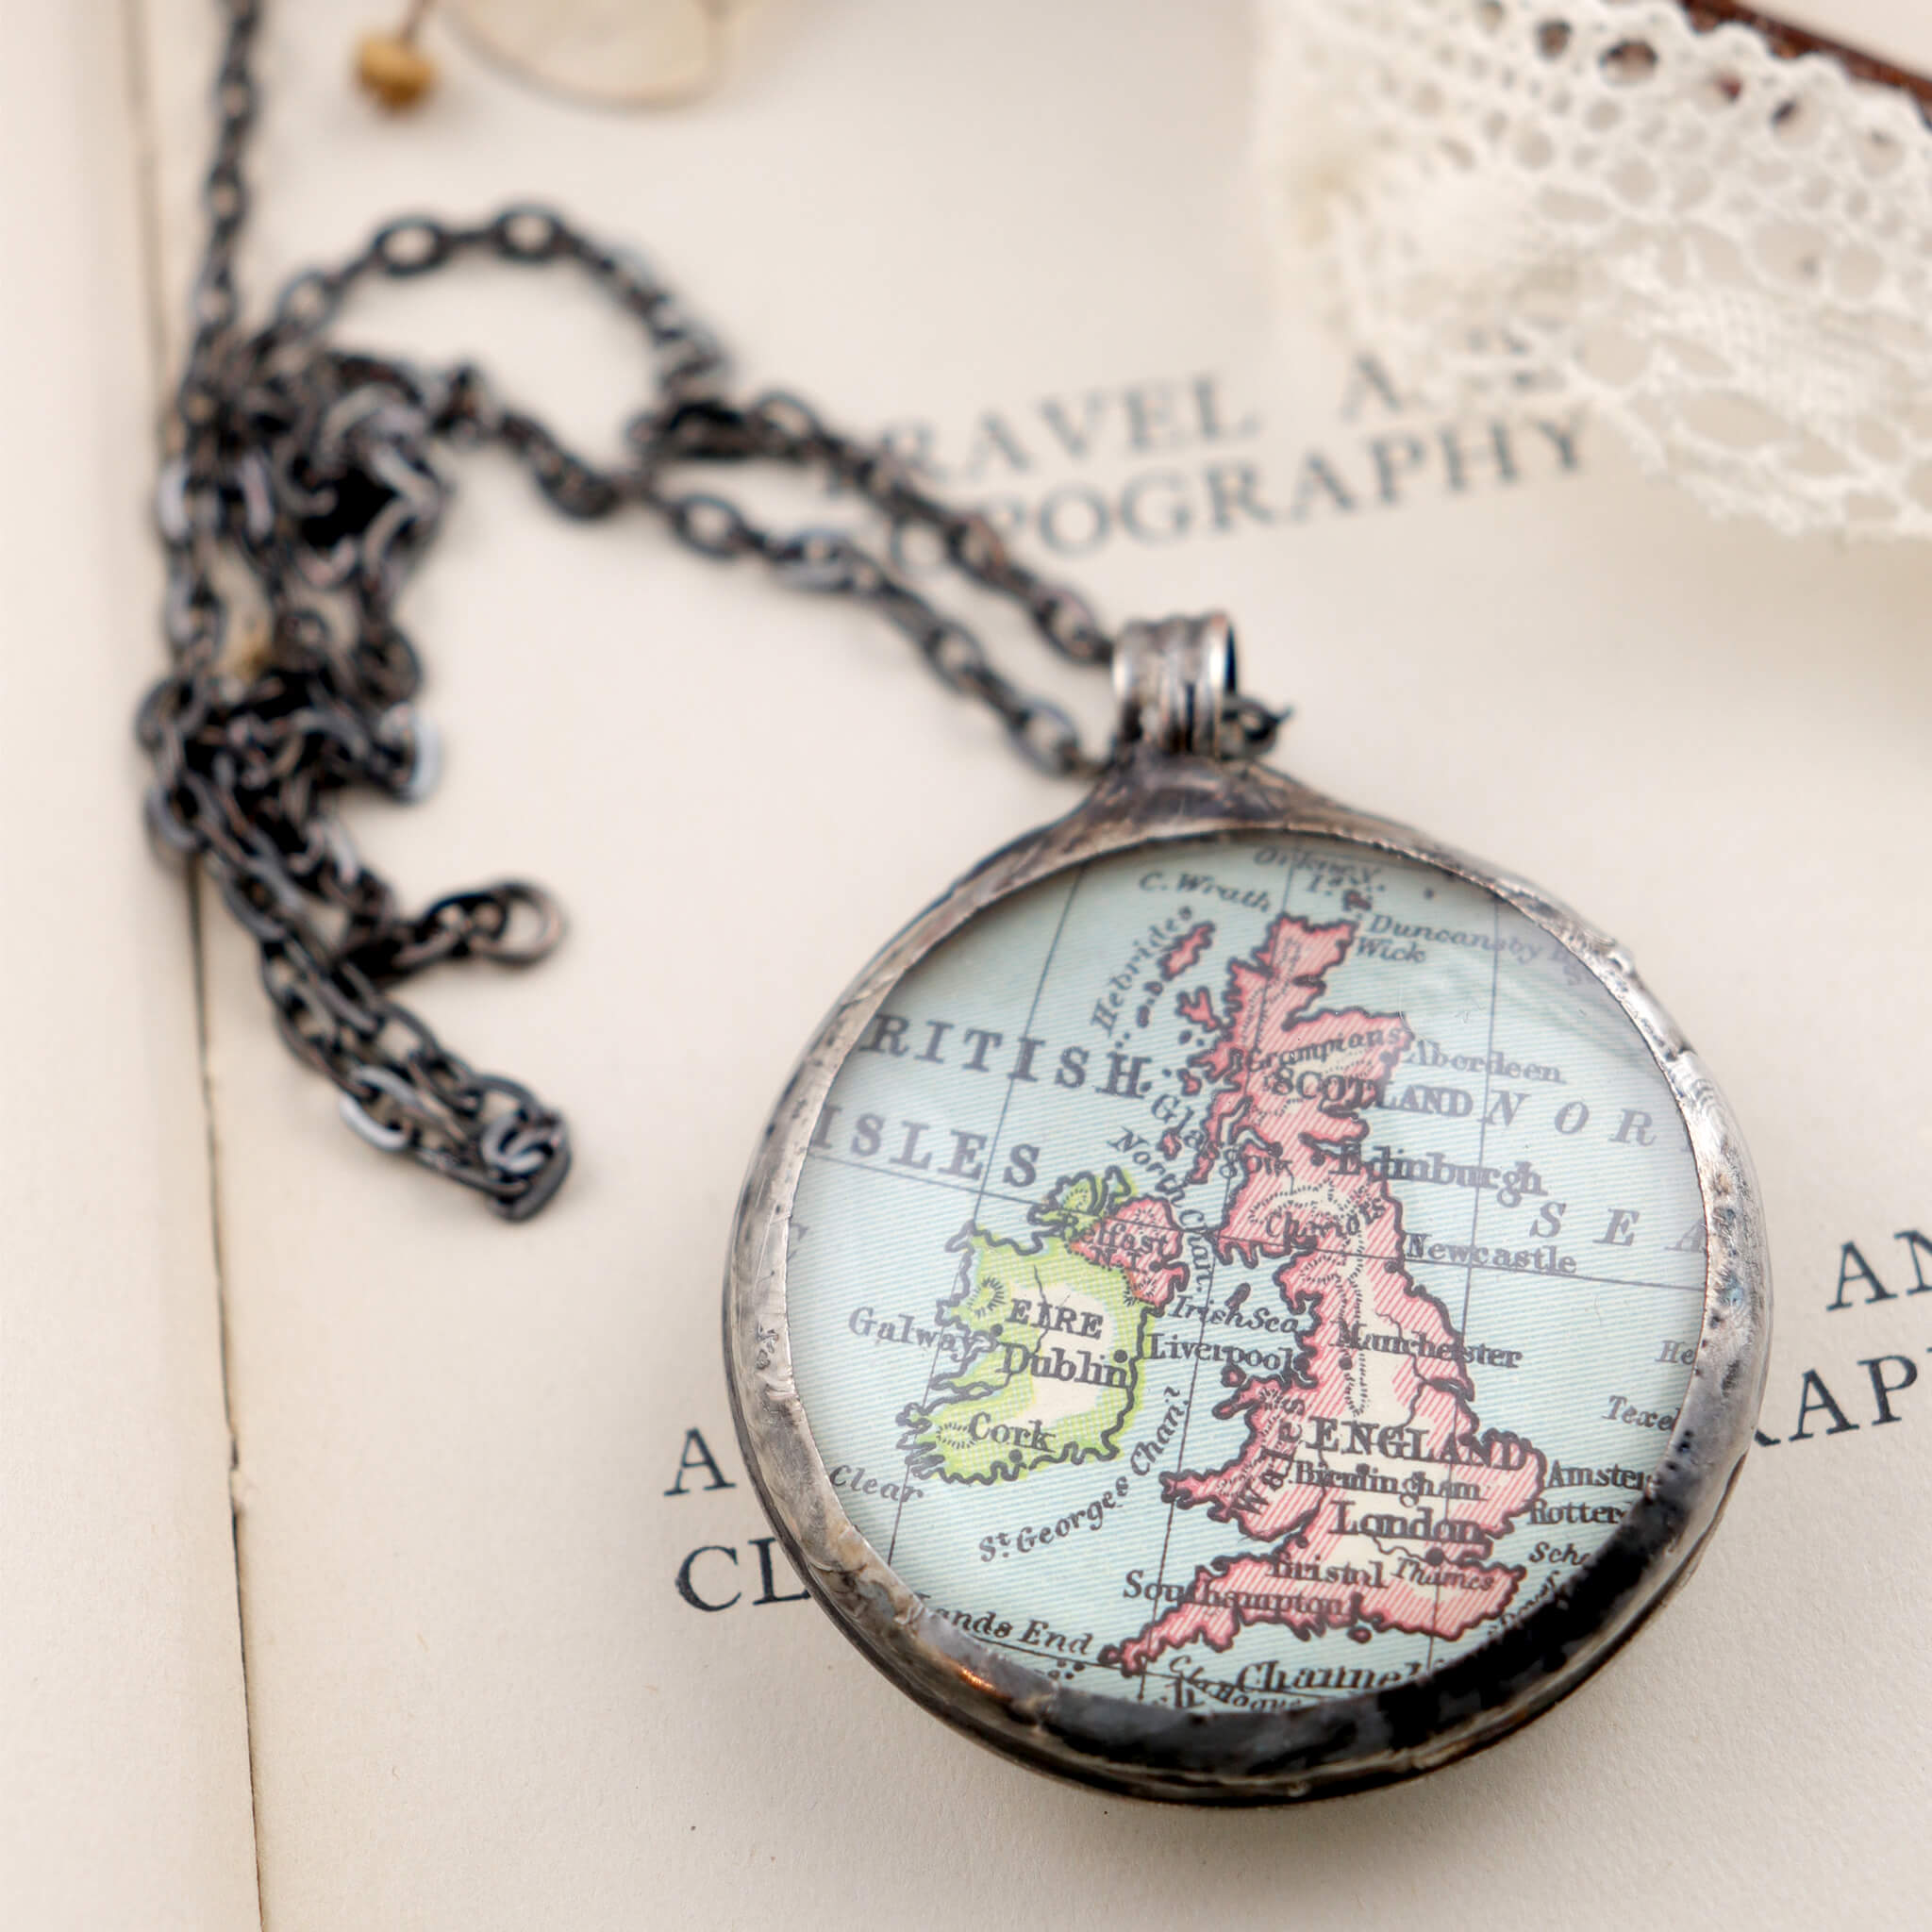 Map of British Isles framed into Tiffany style statement necklace lying on a book